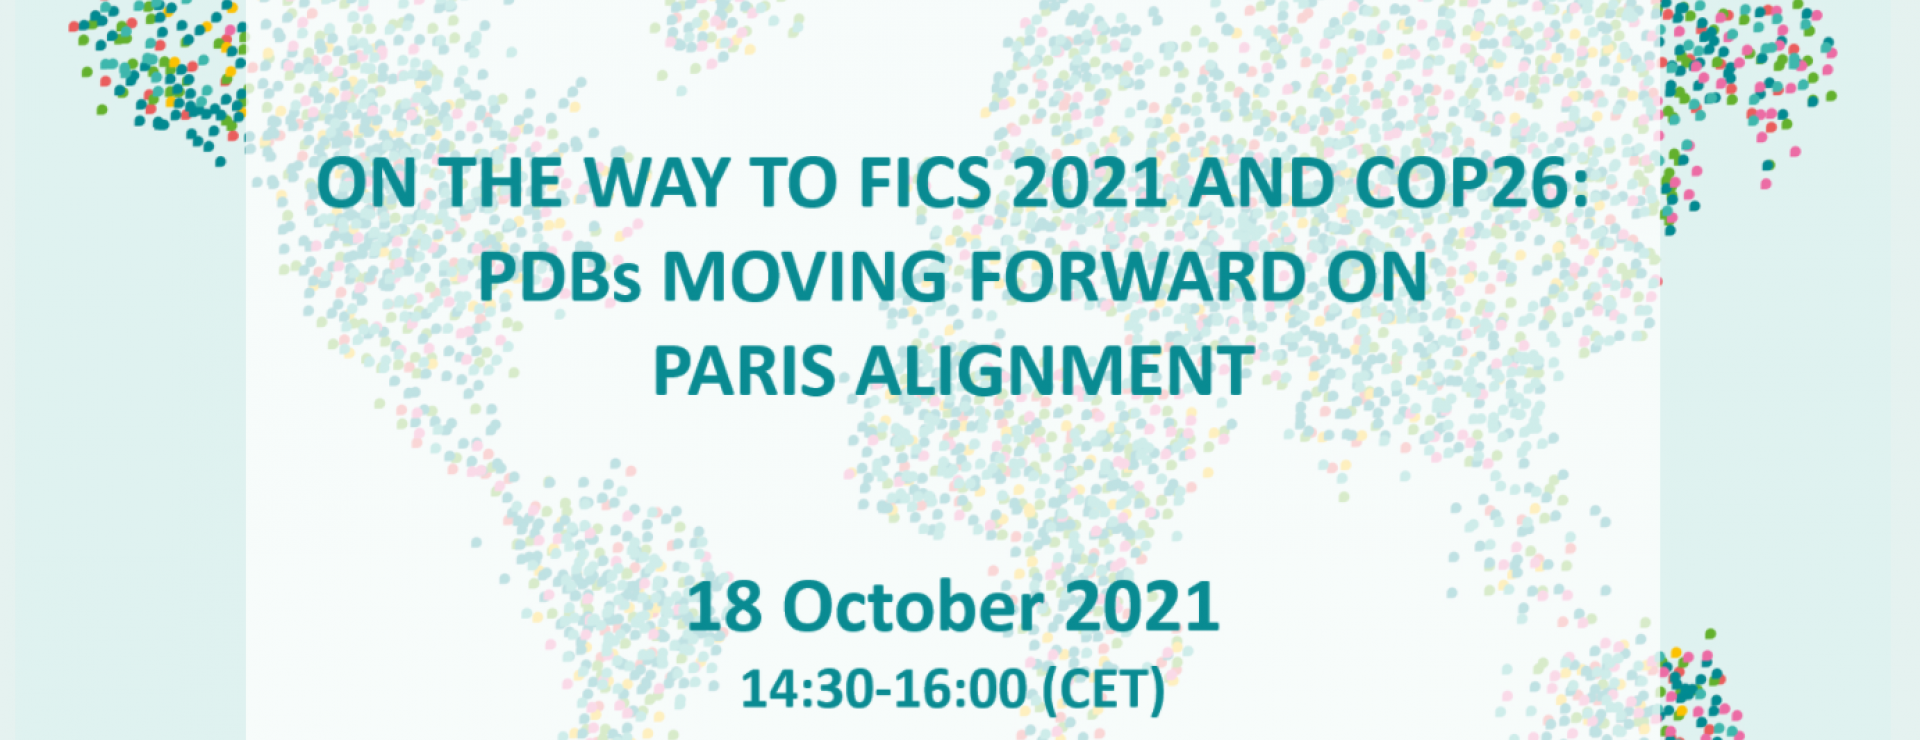 PDBs moving forward on Paris alignment